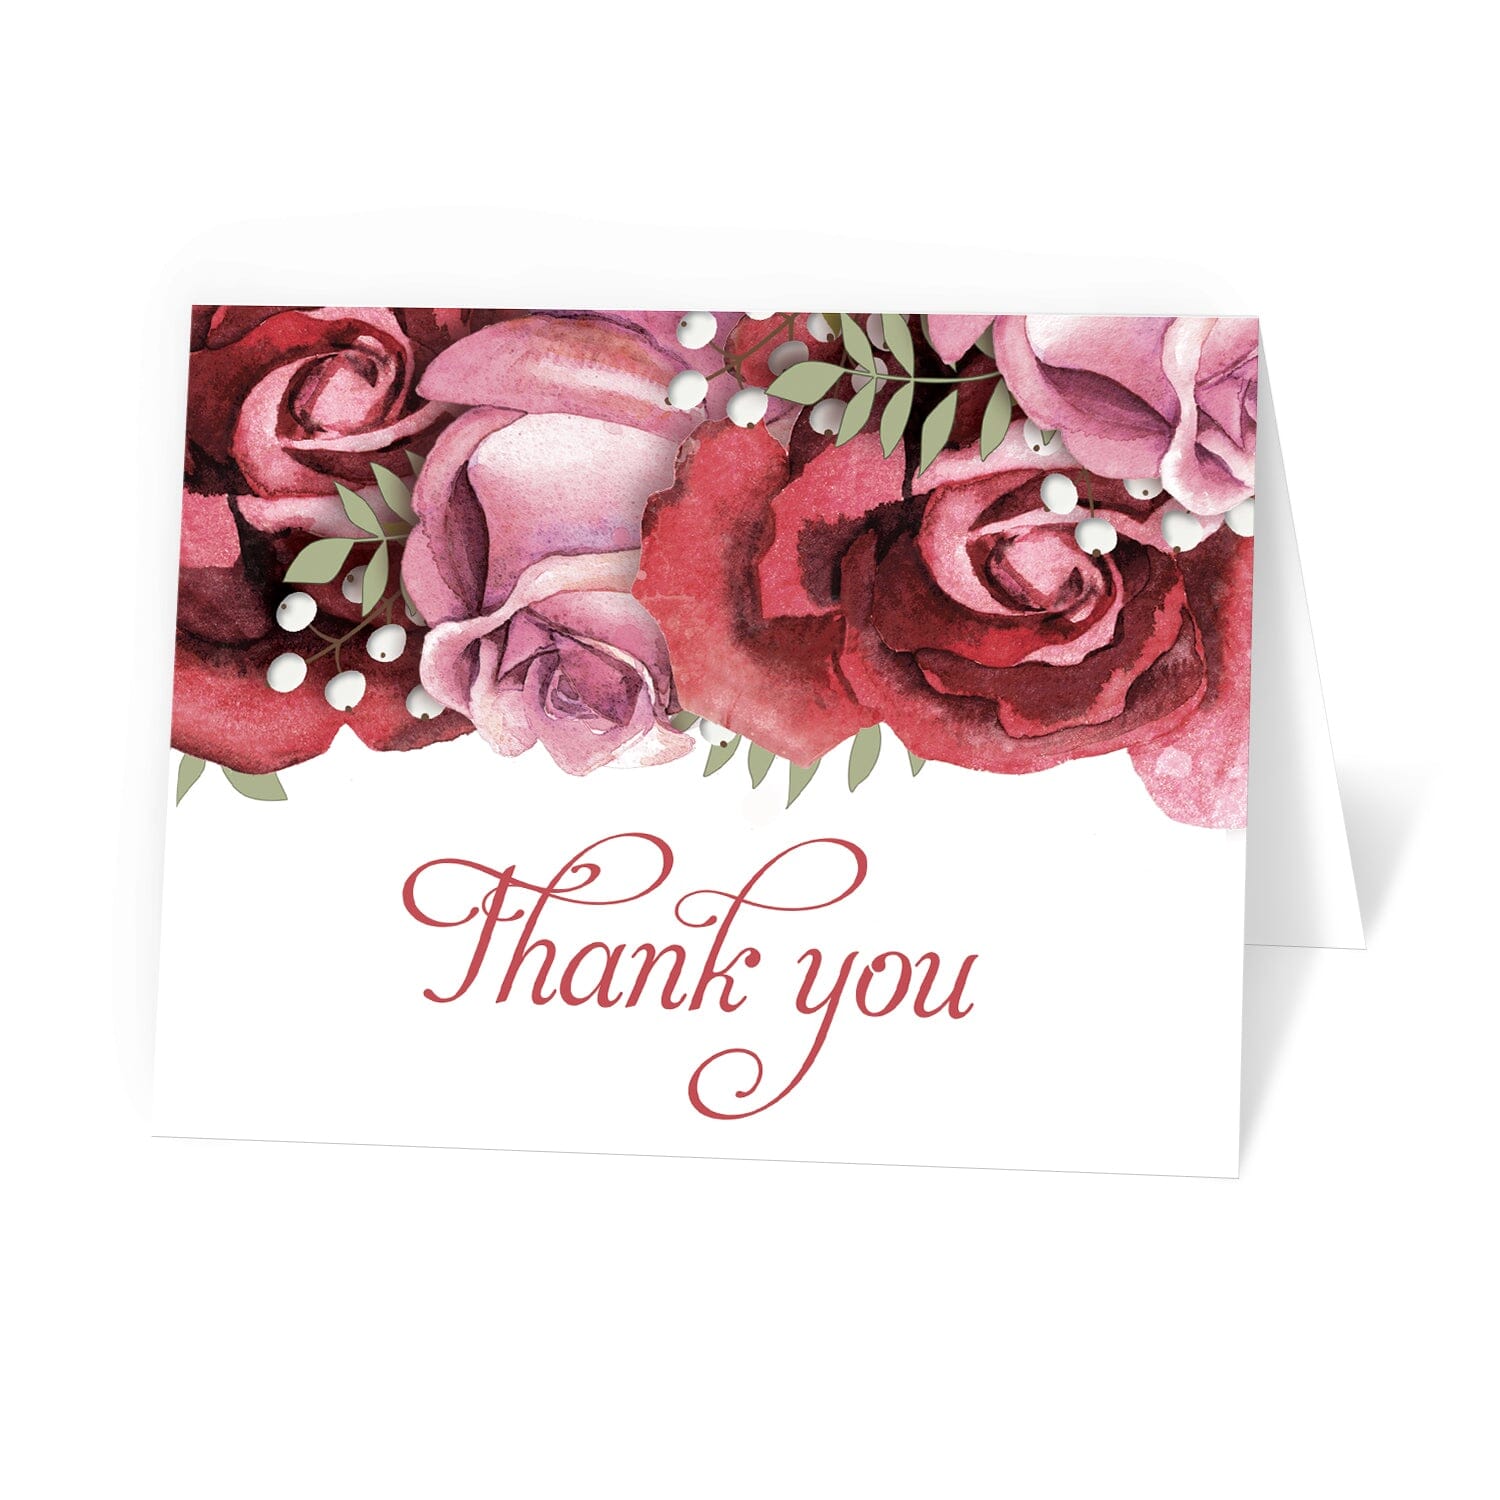 Burgundy Red Pink Rose Thank You Cards at Artistically Invited.